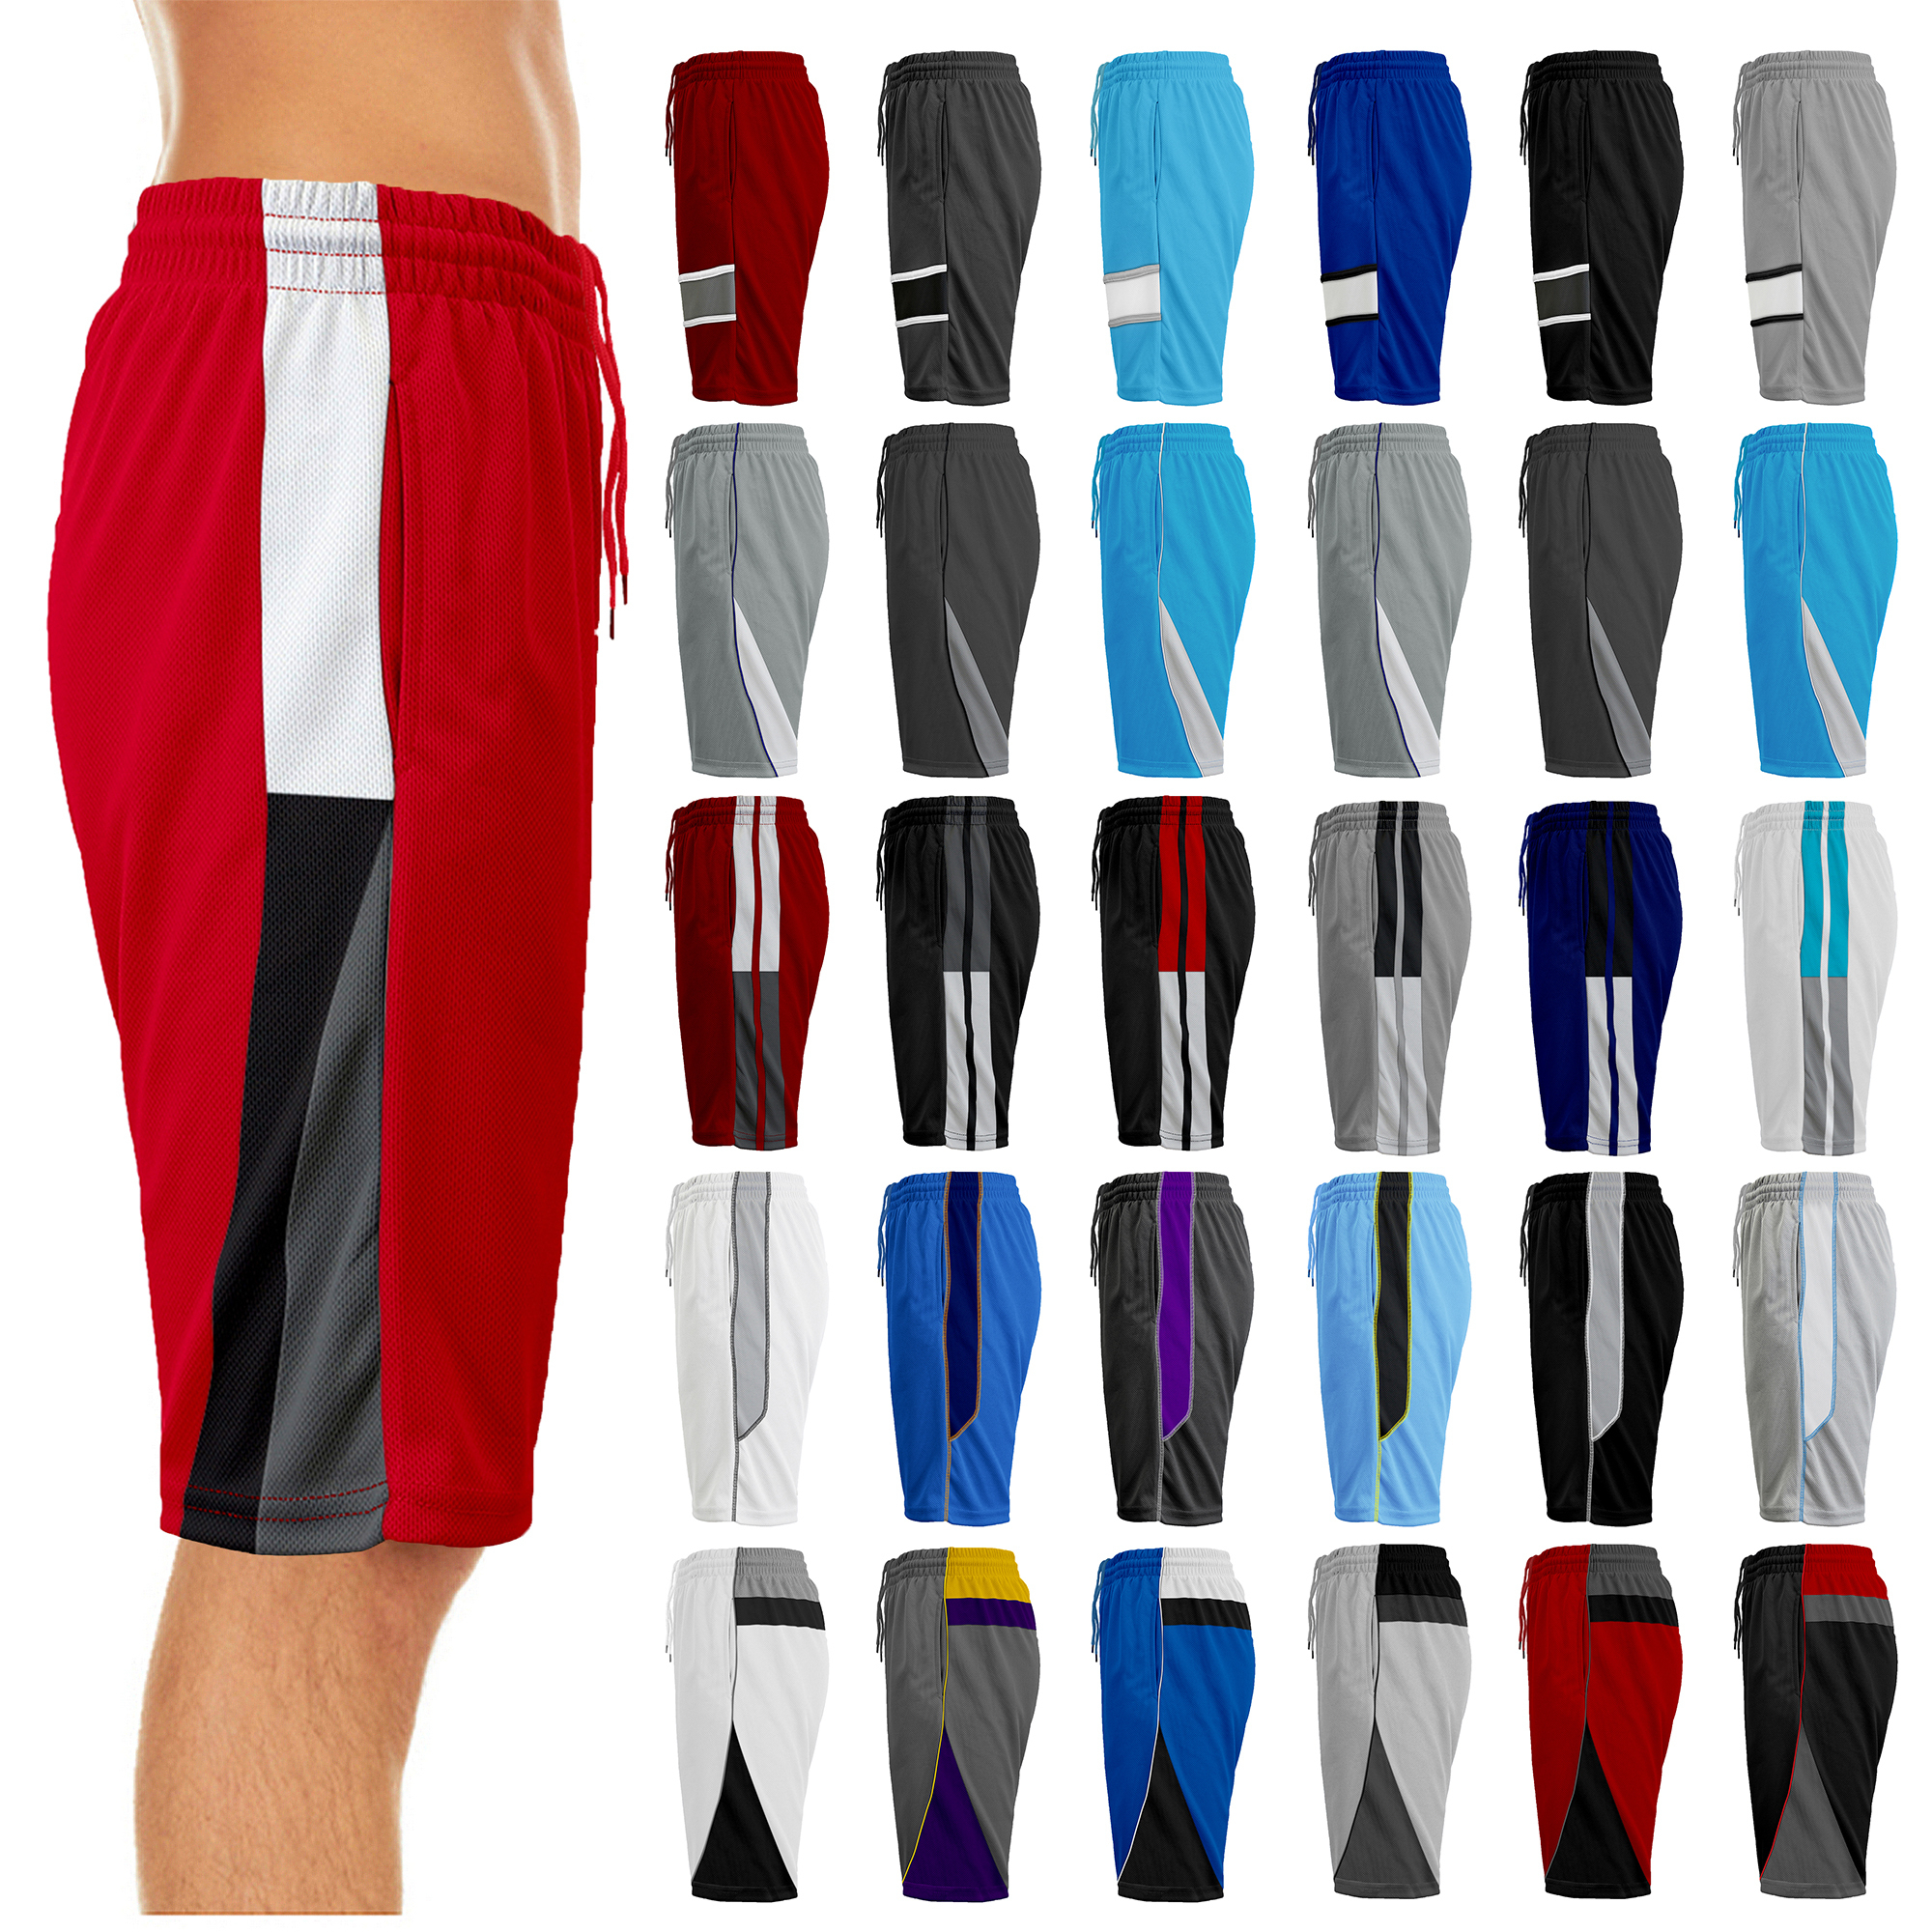 4-Pack: Men's Active Moisture-Wicking Mesh Performance Shorts (S-2XL) - Assorted Styles, Small